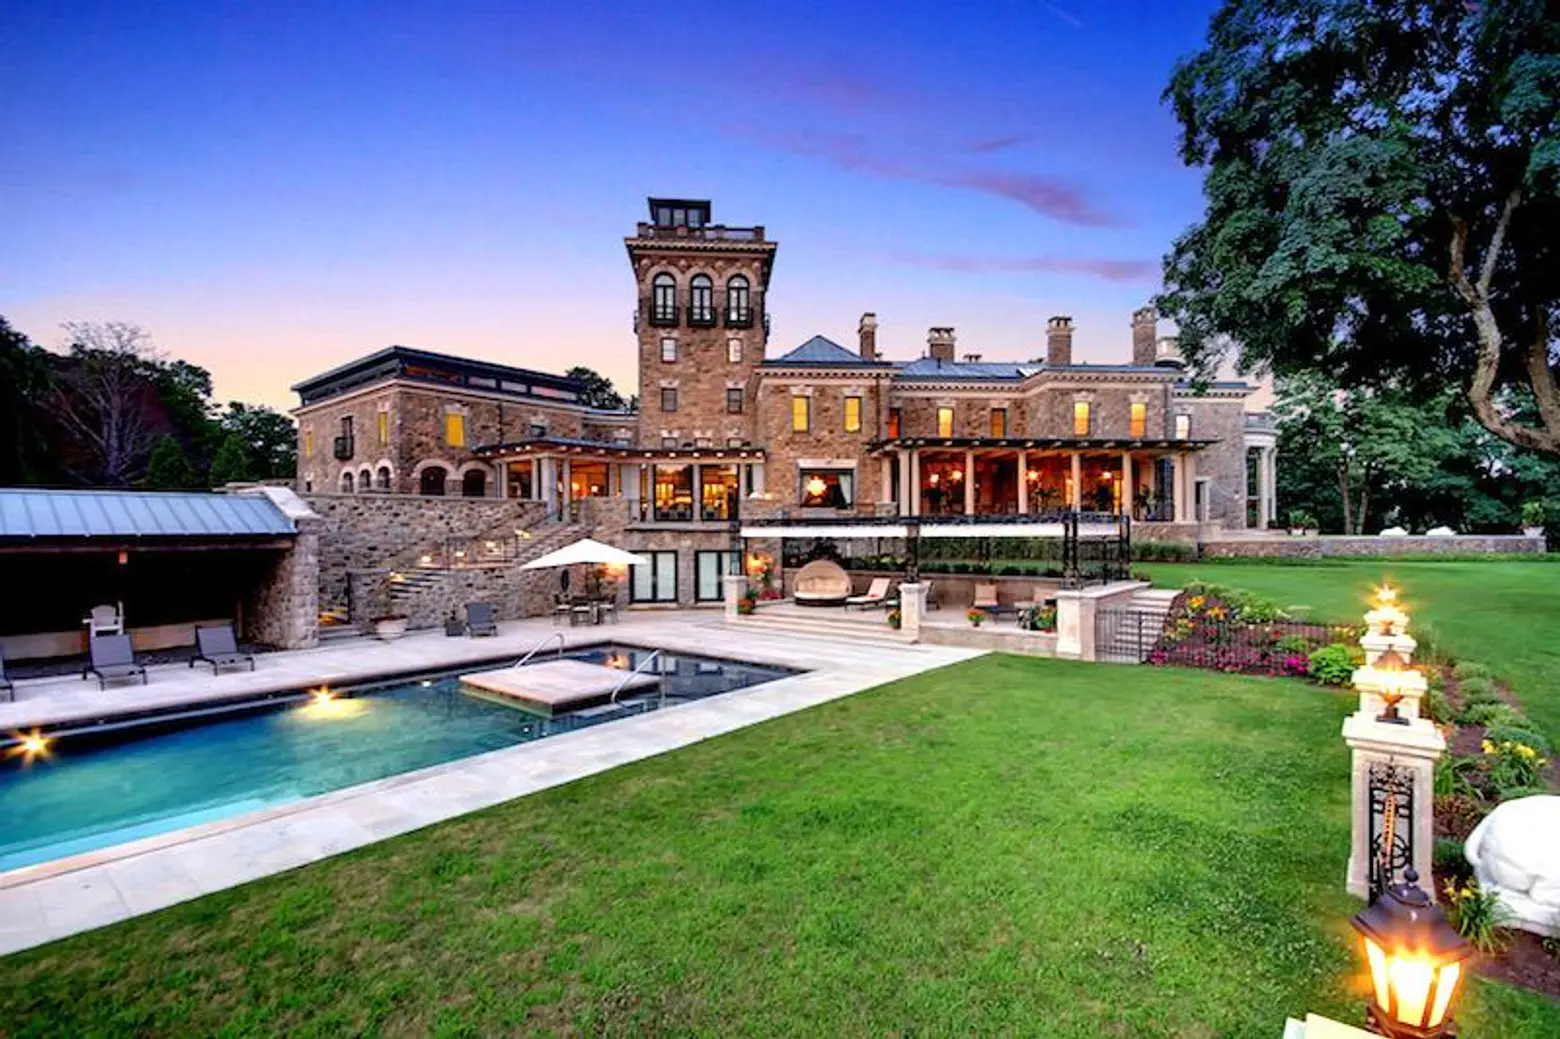 7 Things We Love About Fashion Designer Marc Ecko's Stronghold Estate